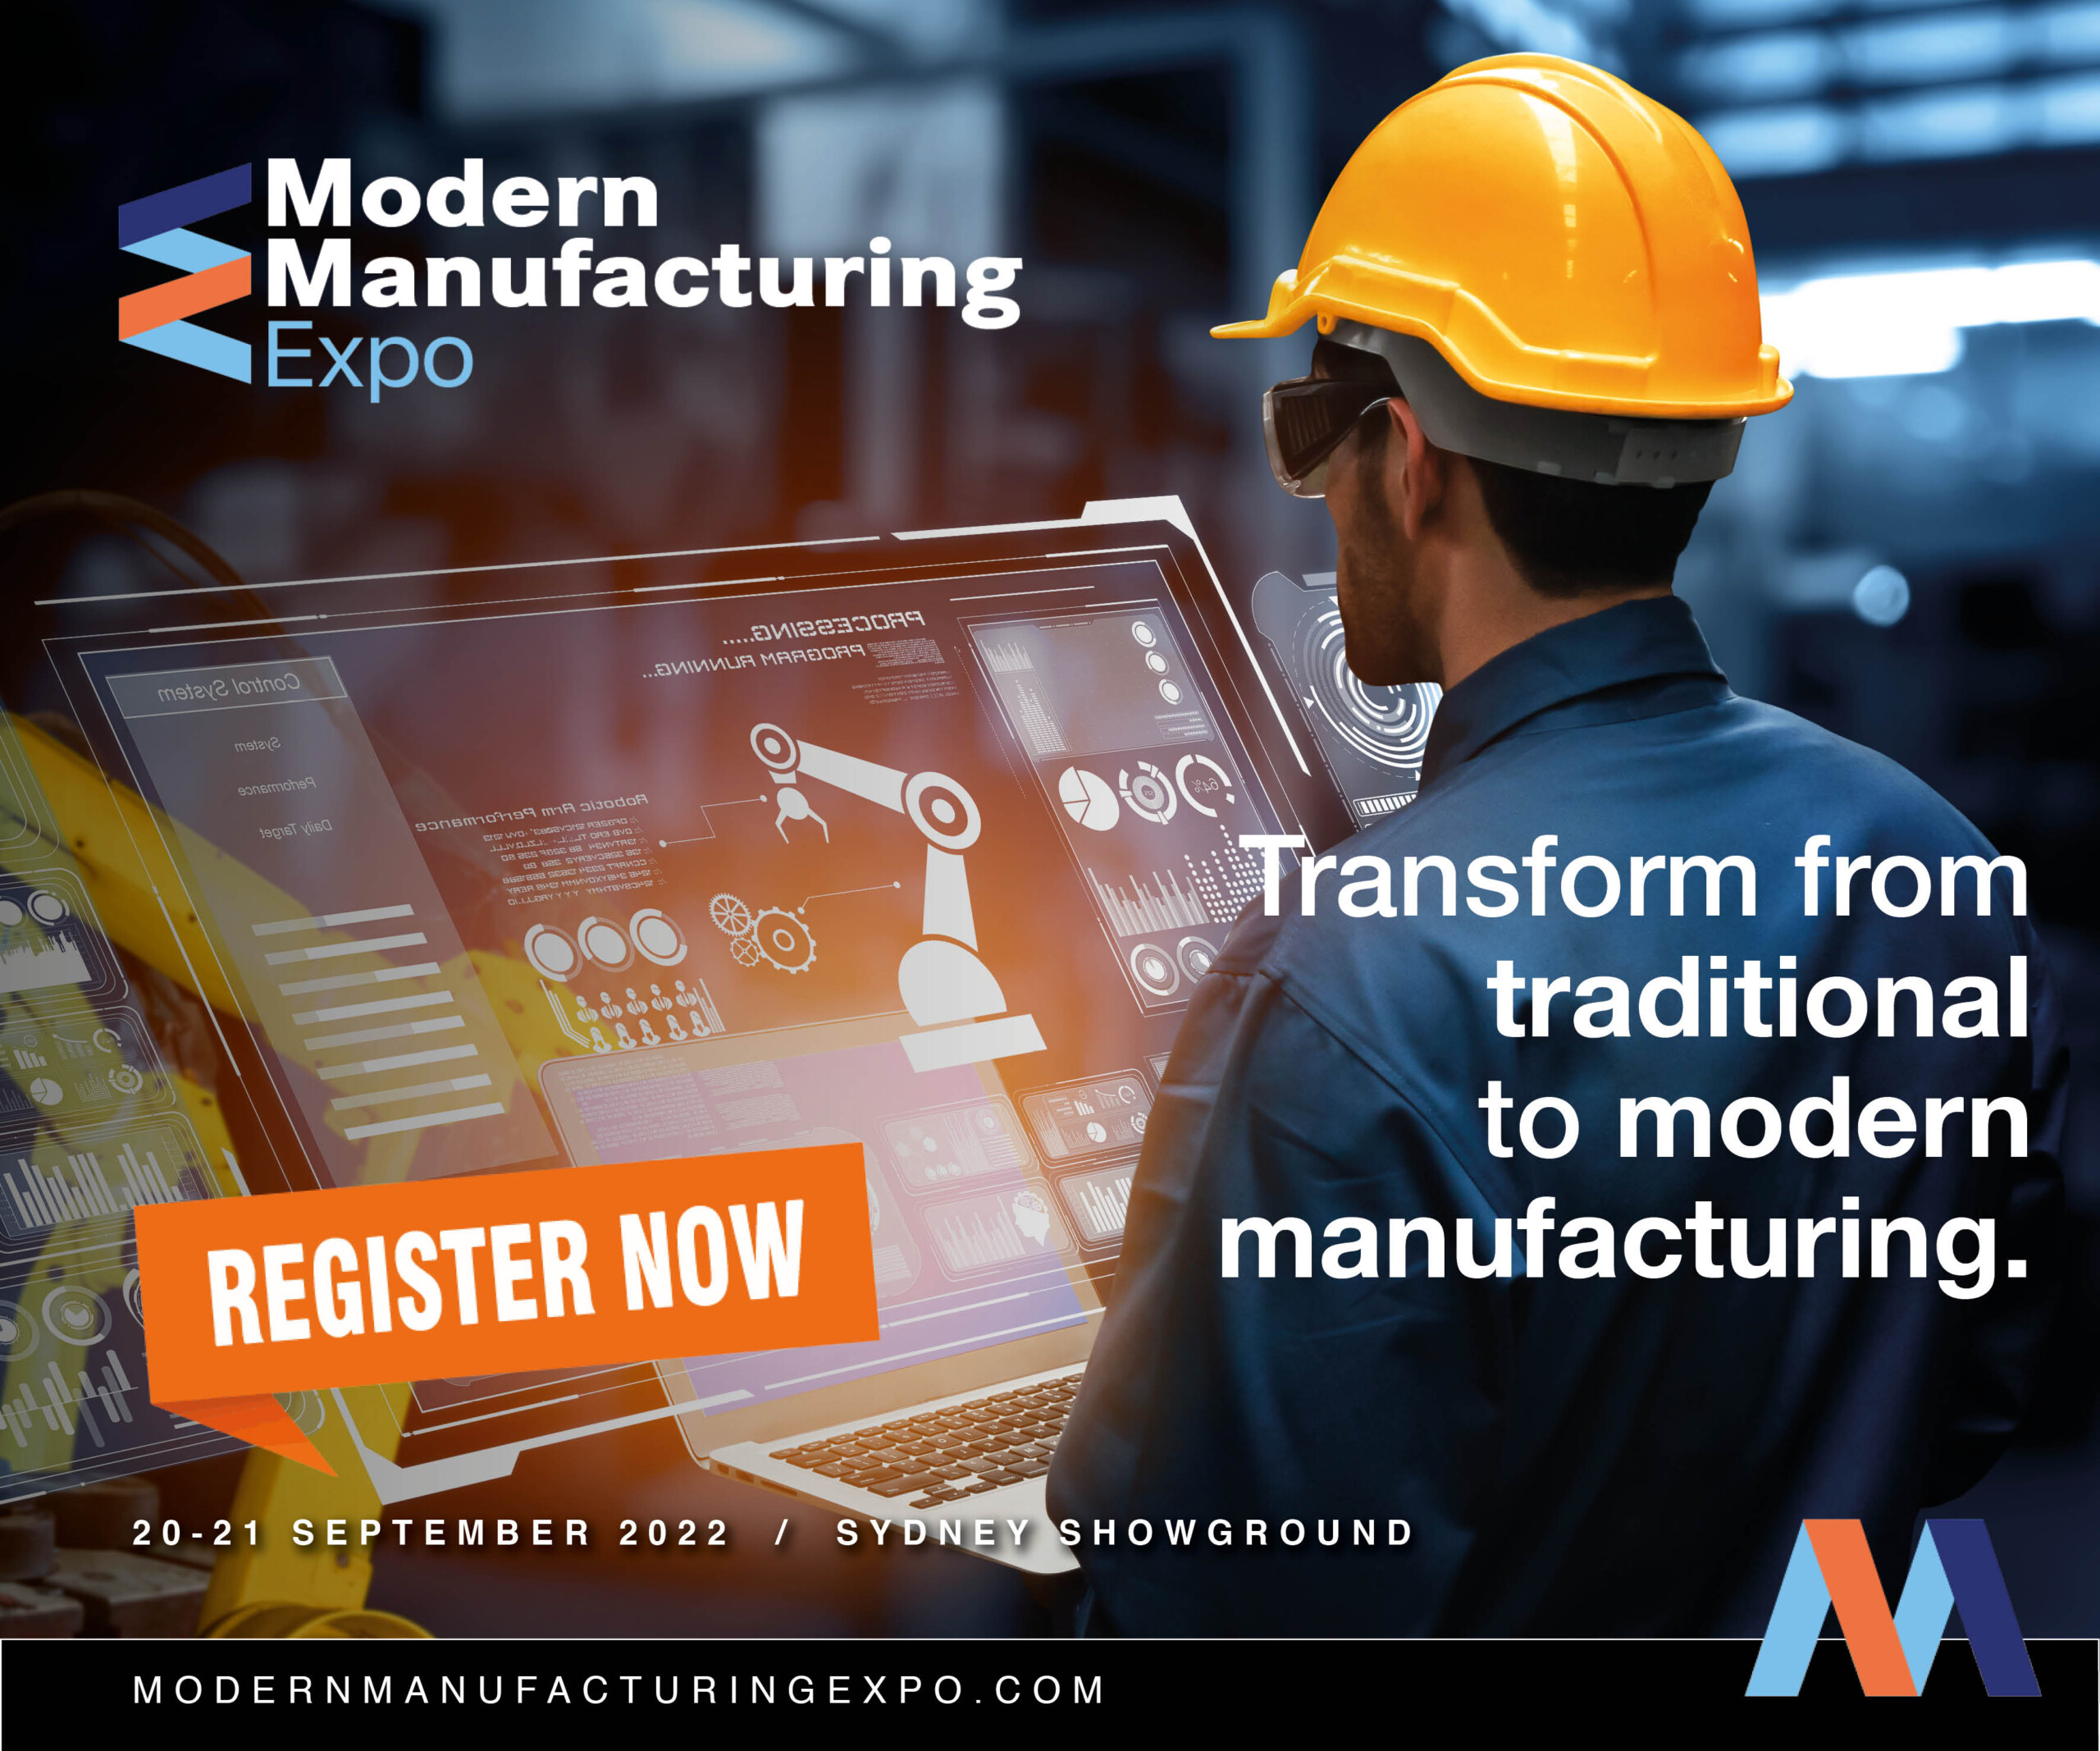 ACC at the Modern Manufacturing Expo